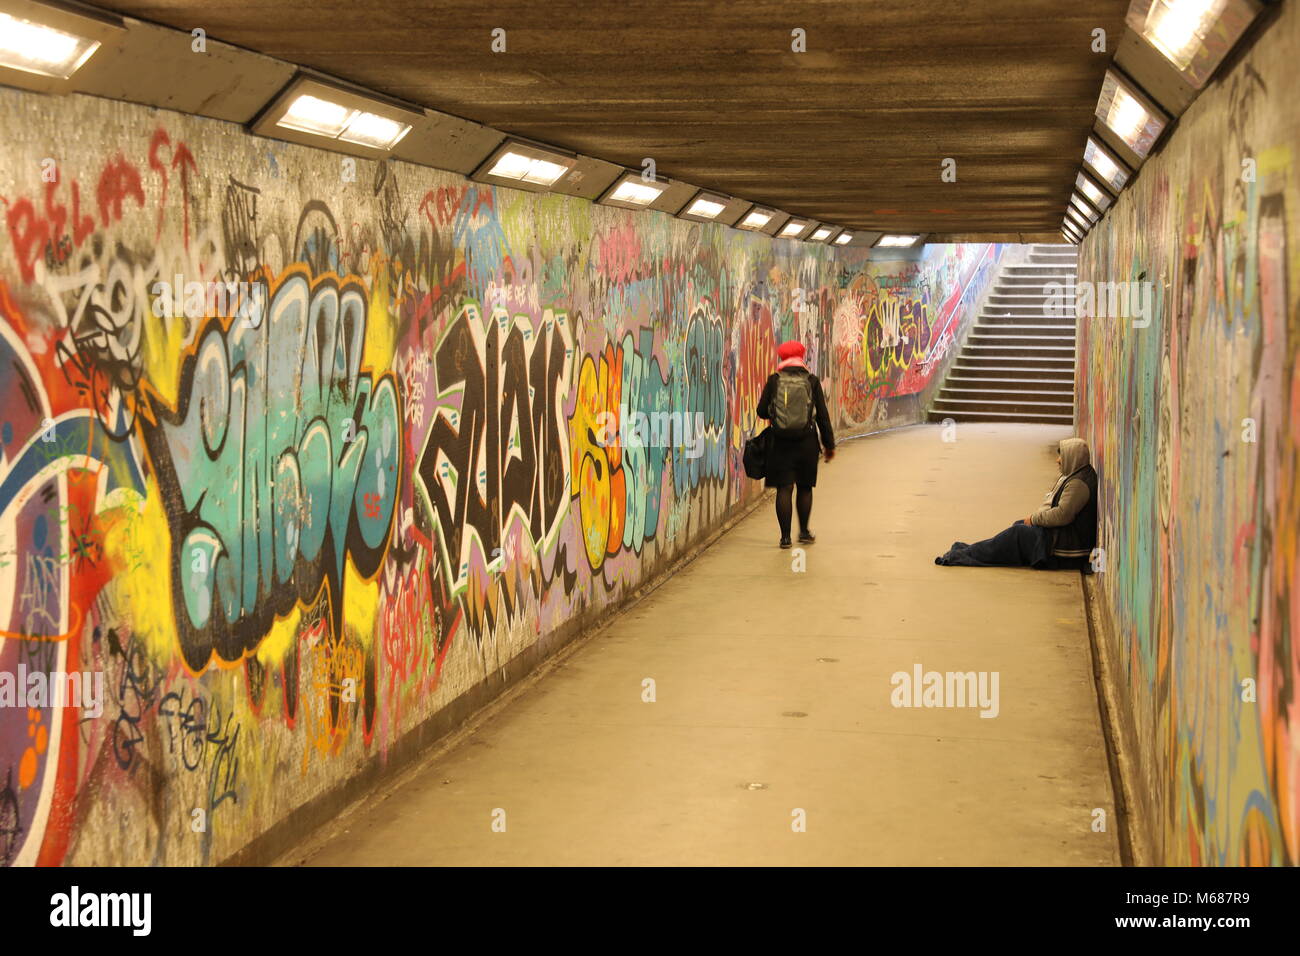 Homeless man begging for money in a subway tunnel covered in graffiti Stock Photo